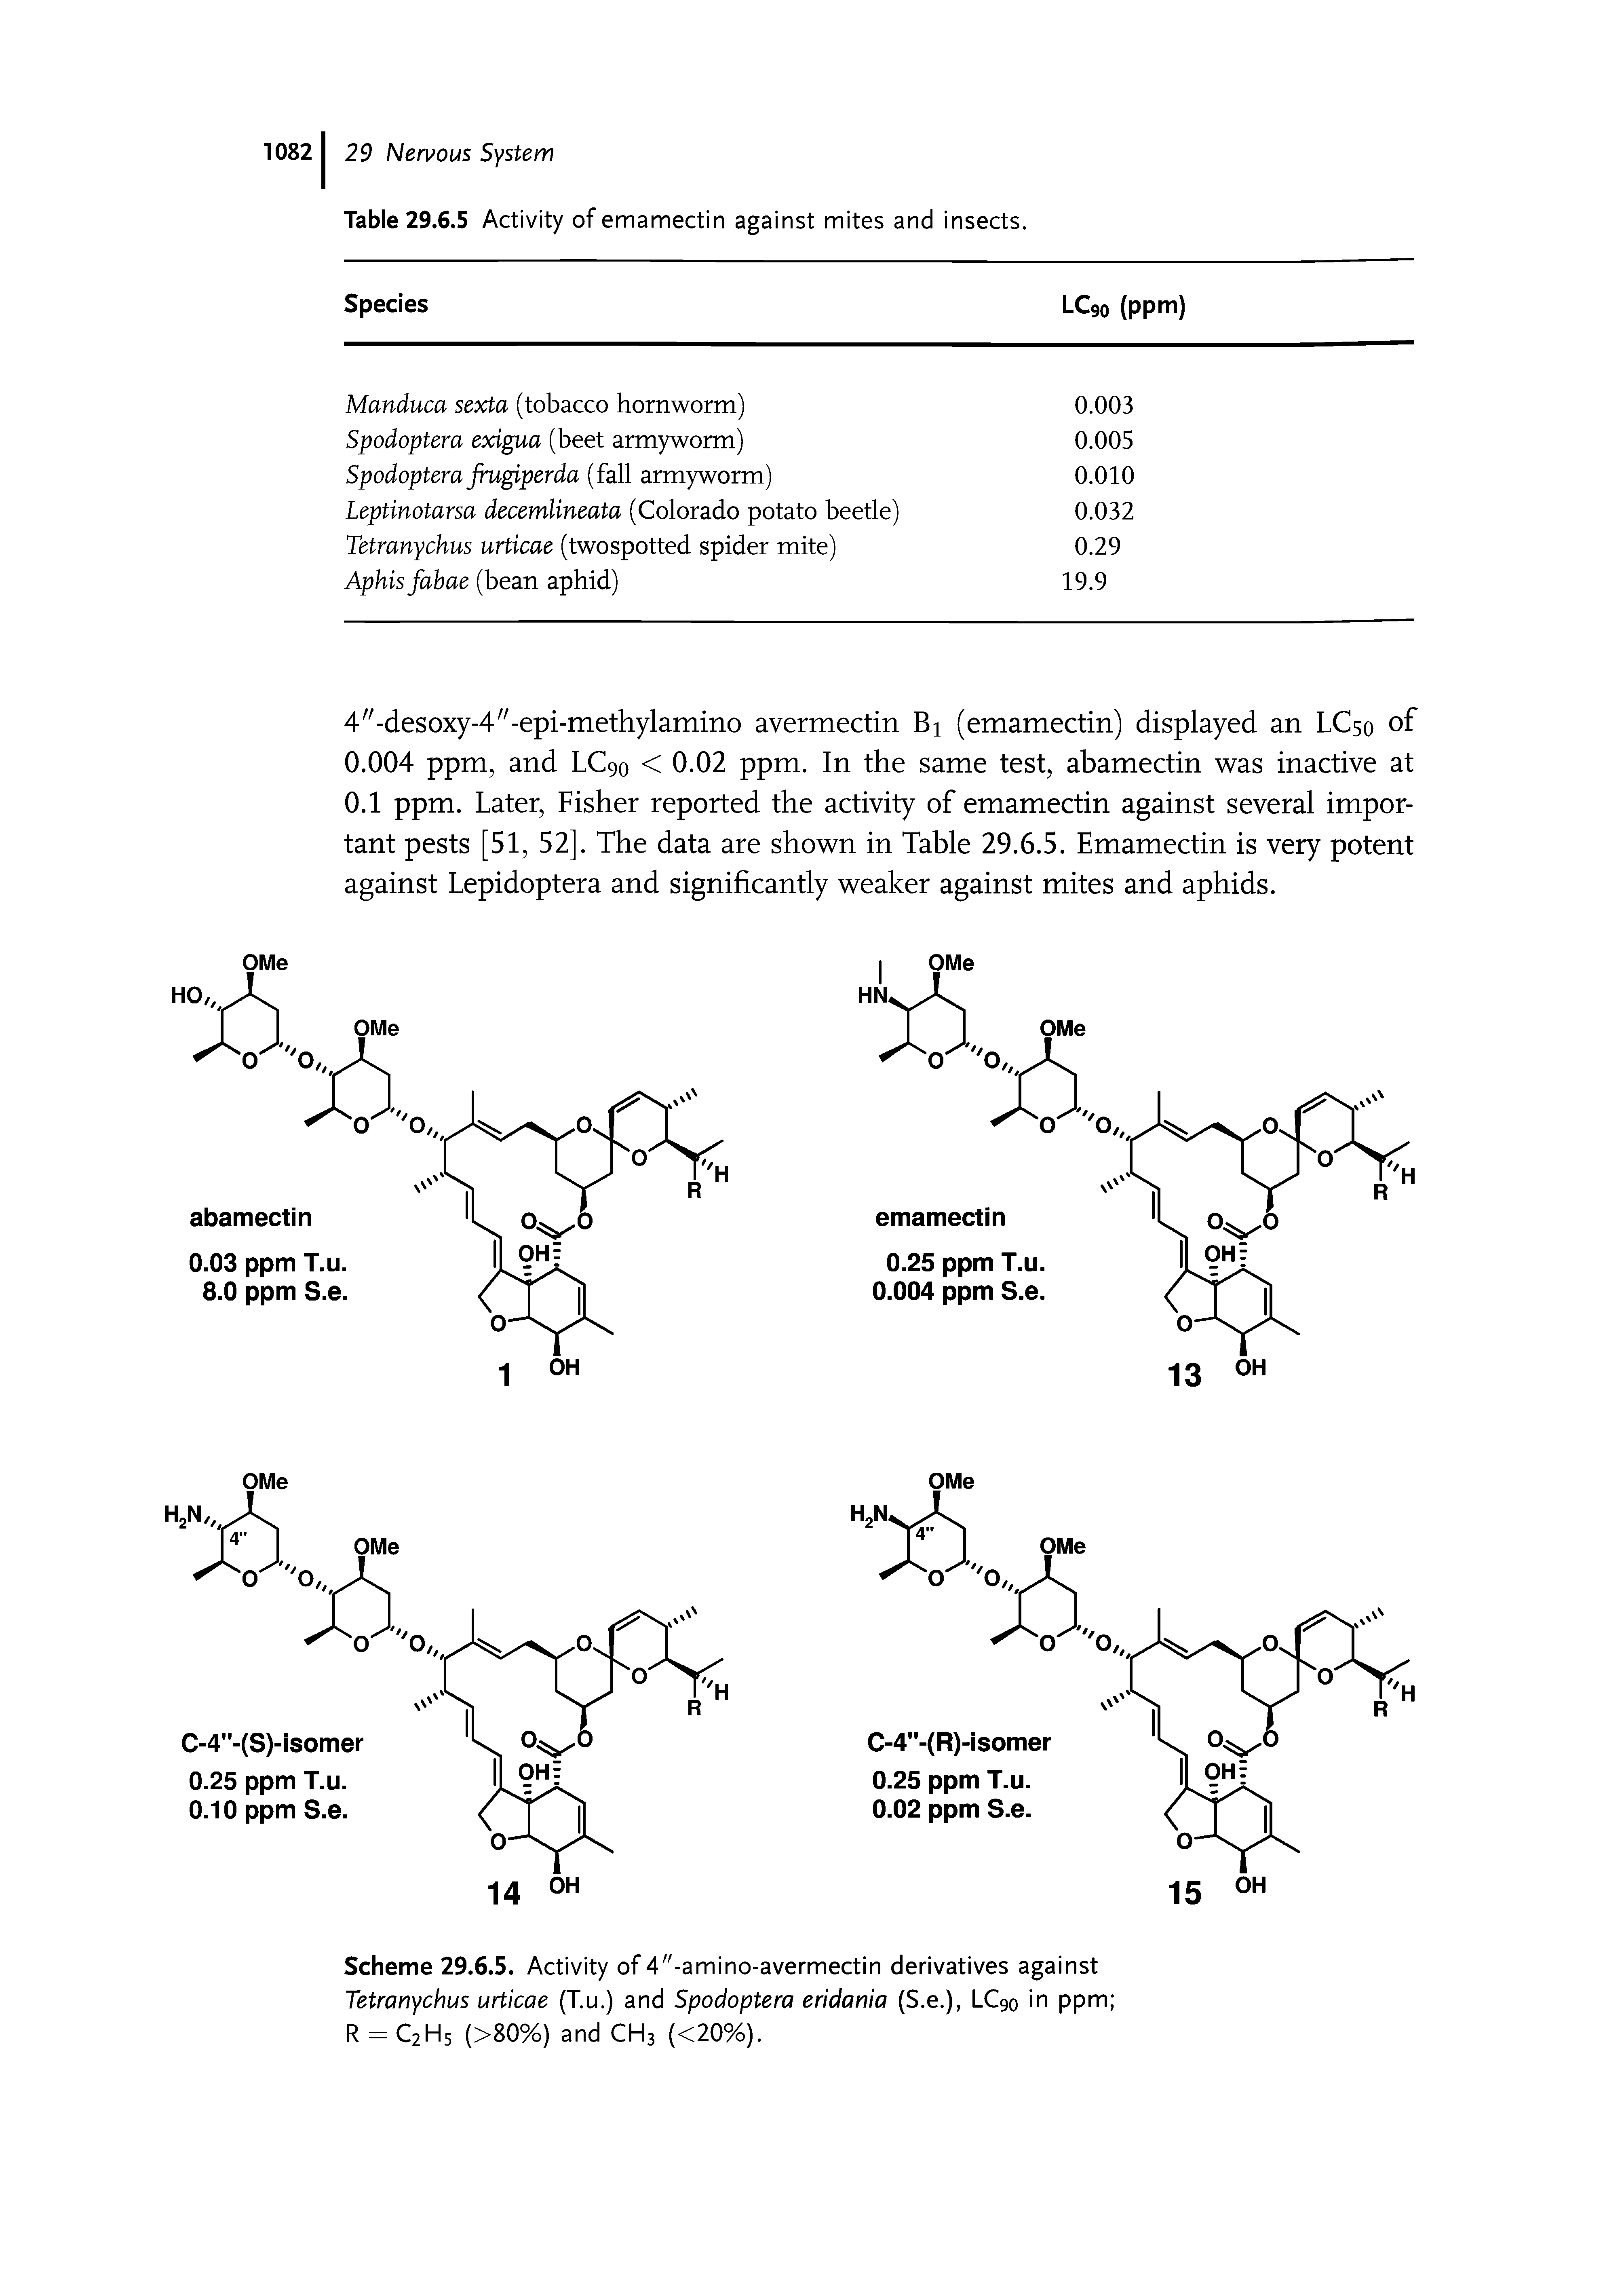 Scheme 29.6.5. Activity of 4"-amino-avermectin derivatives against Tetranychus urticae (T.u.) and Spodoptera eridania (S.e.), LC90 in ppm R = C2H5 (>80%) and CH3 (<20%).